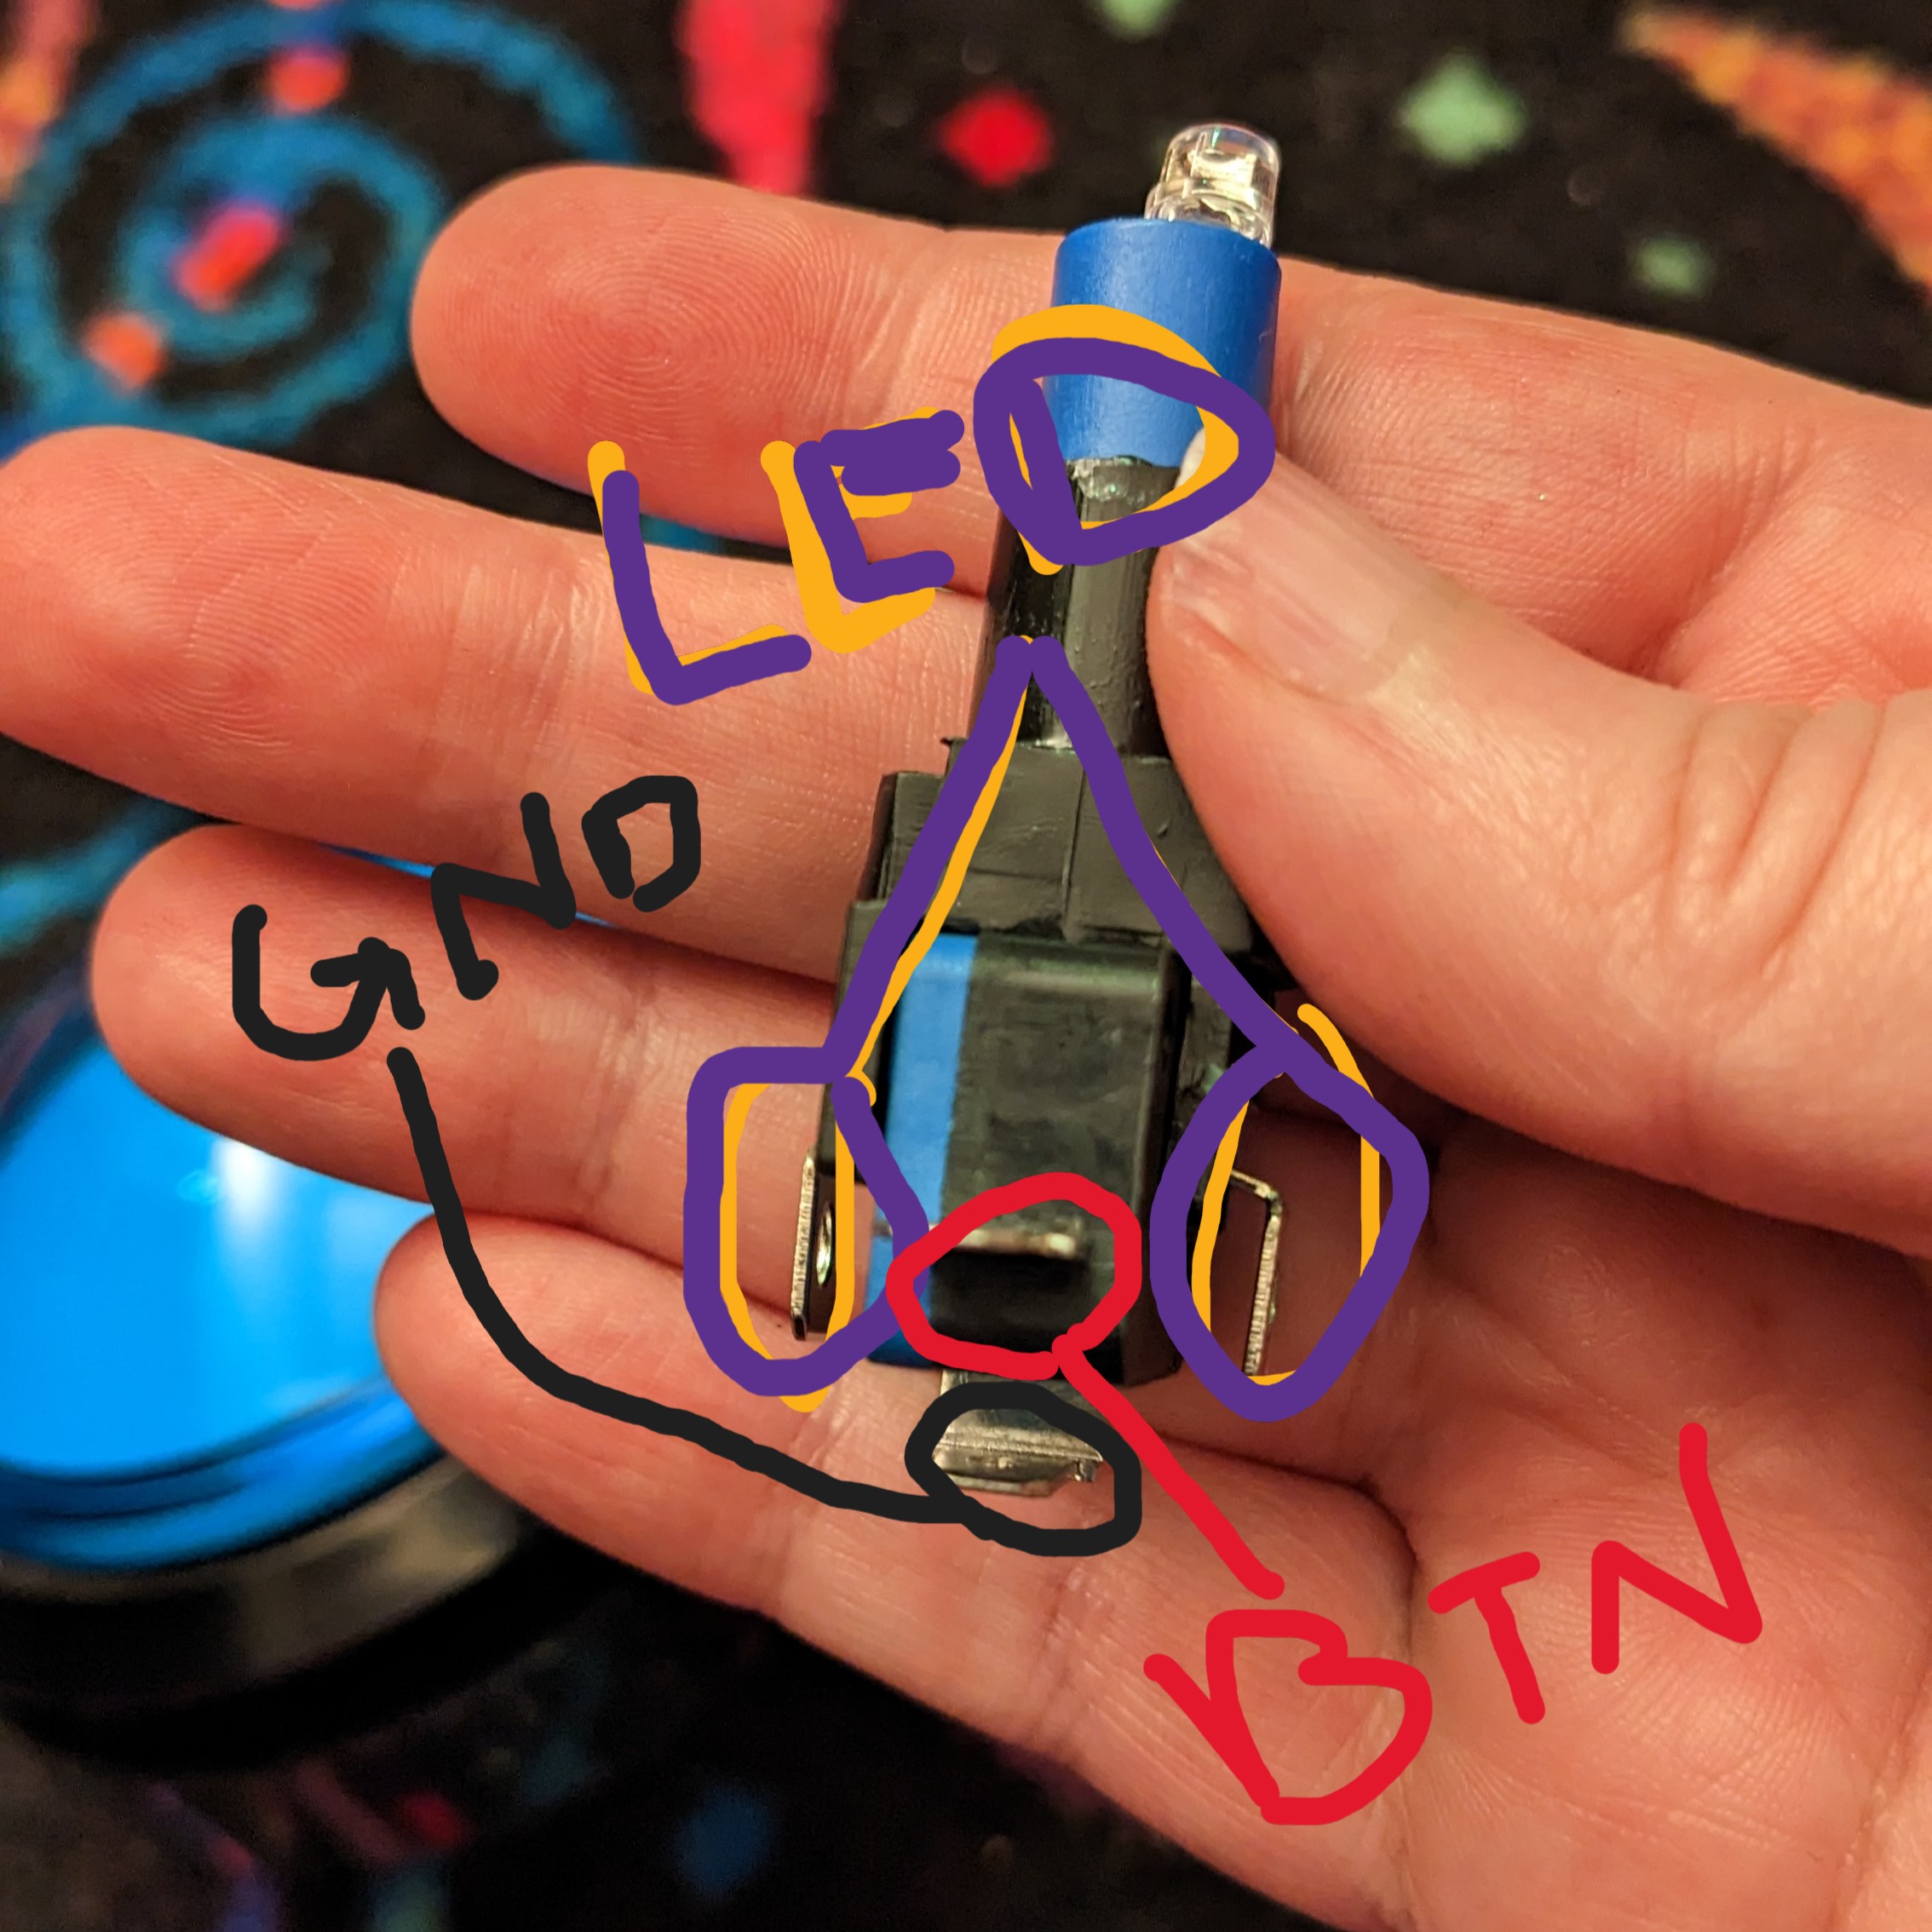 Photo of my hand holding the microswitch/LED, with terminals labelled LED, BTN, and GND